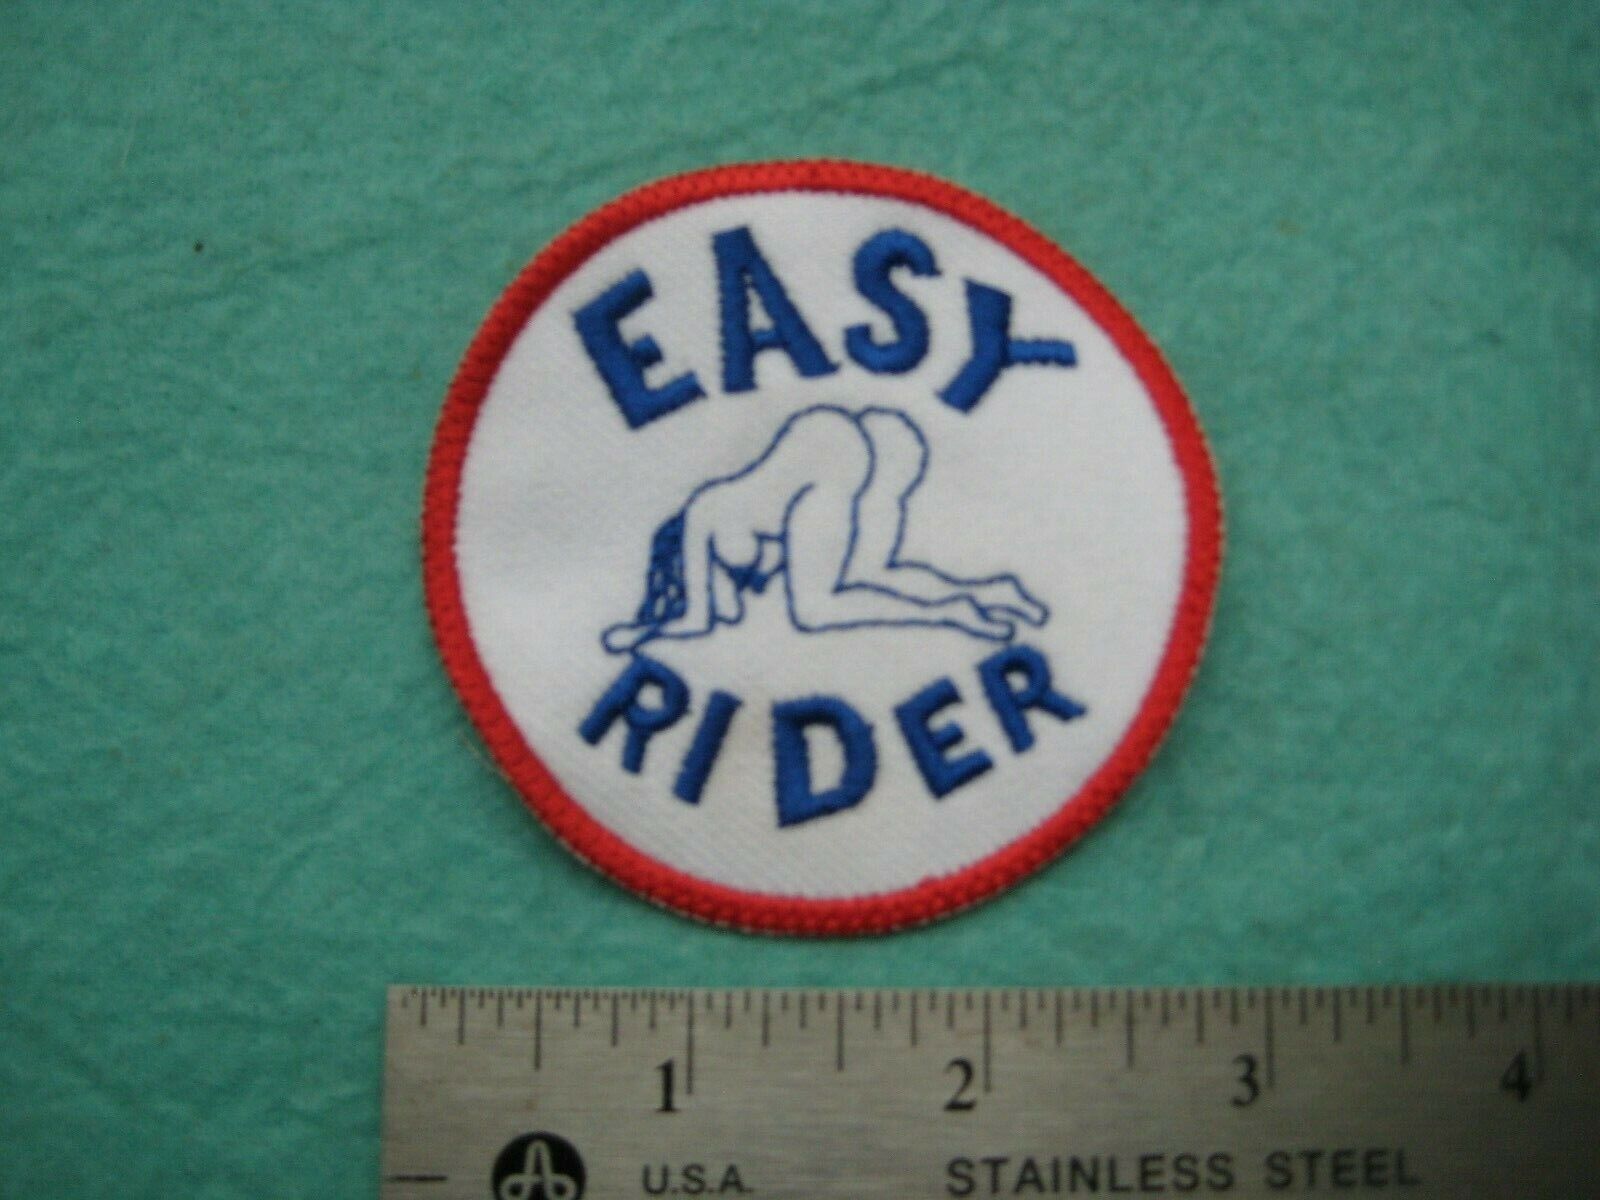 Easy Rider Red White Blue Jacket  Hat  Patch 